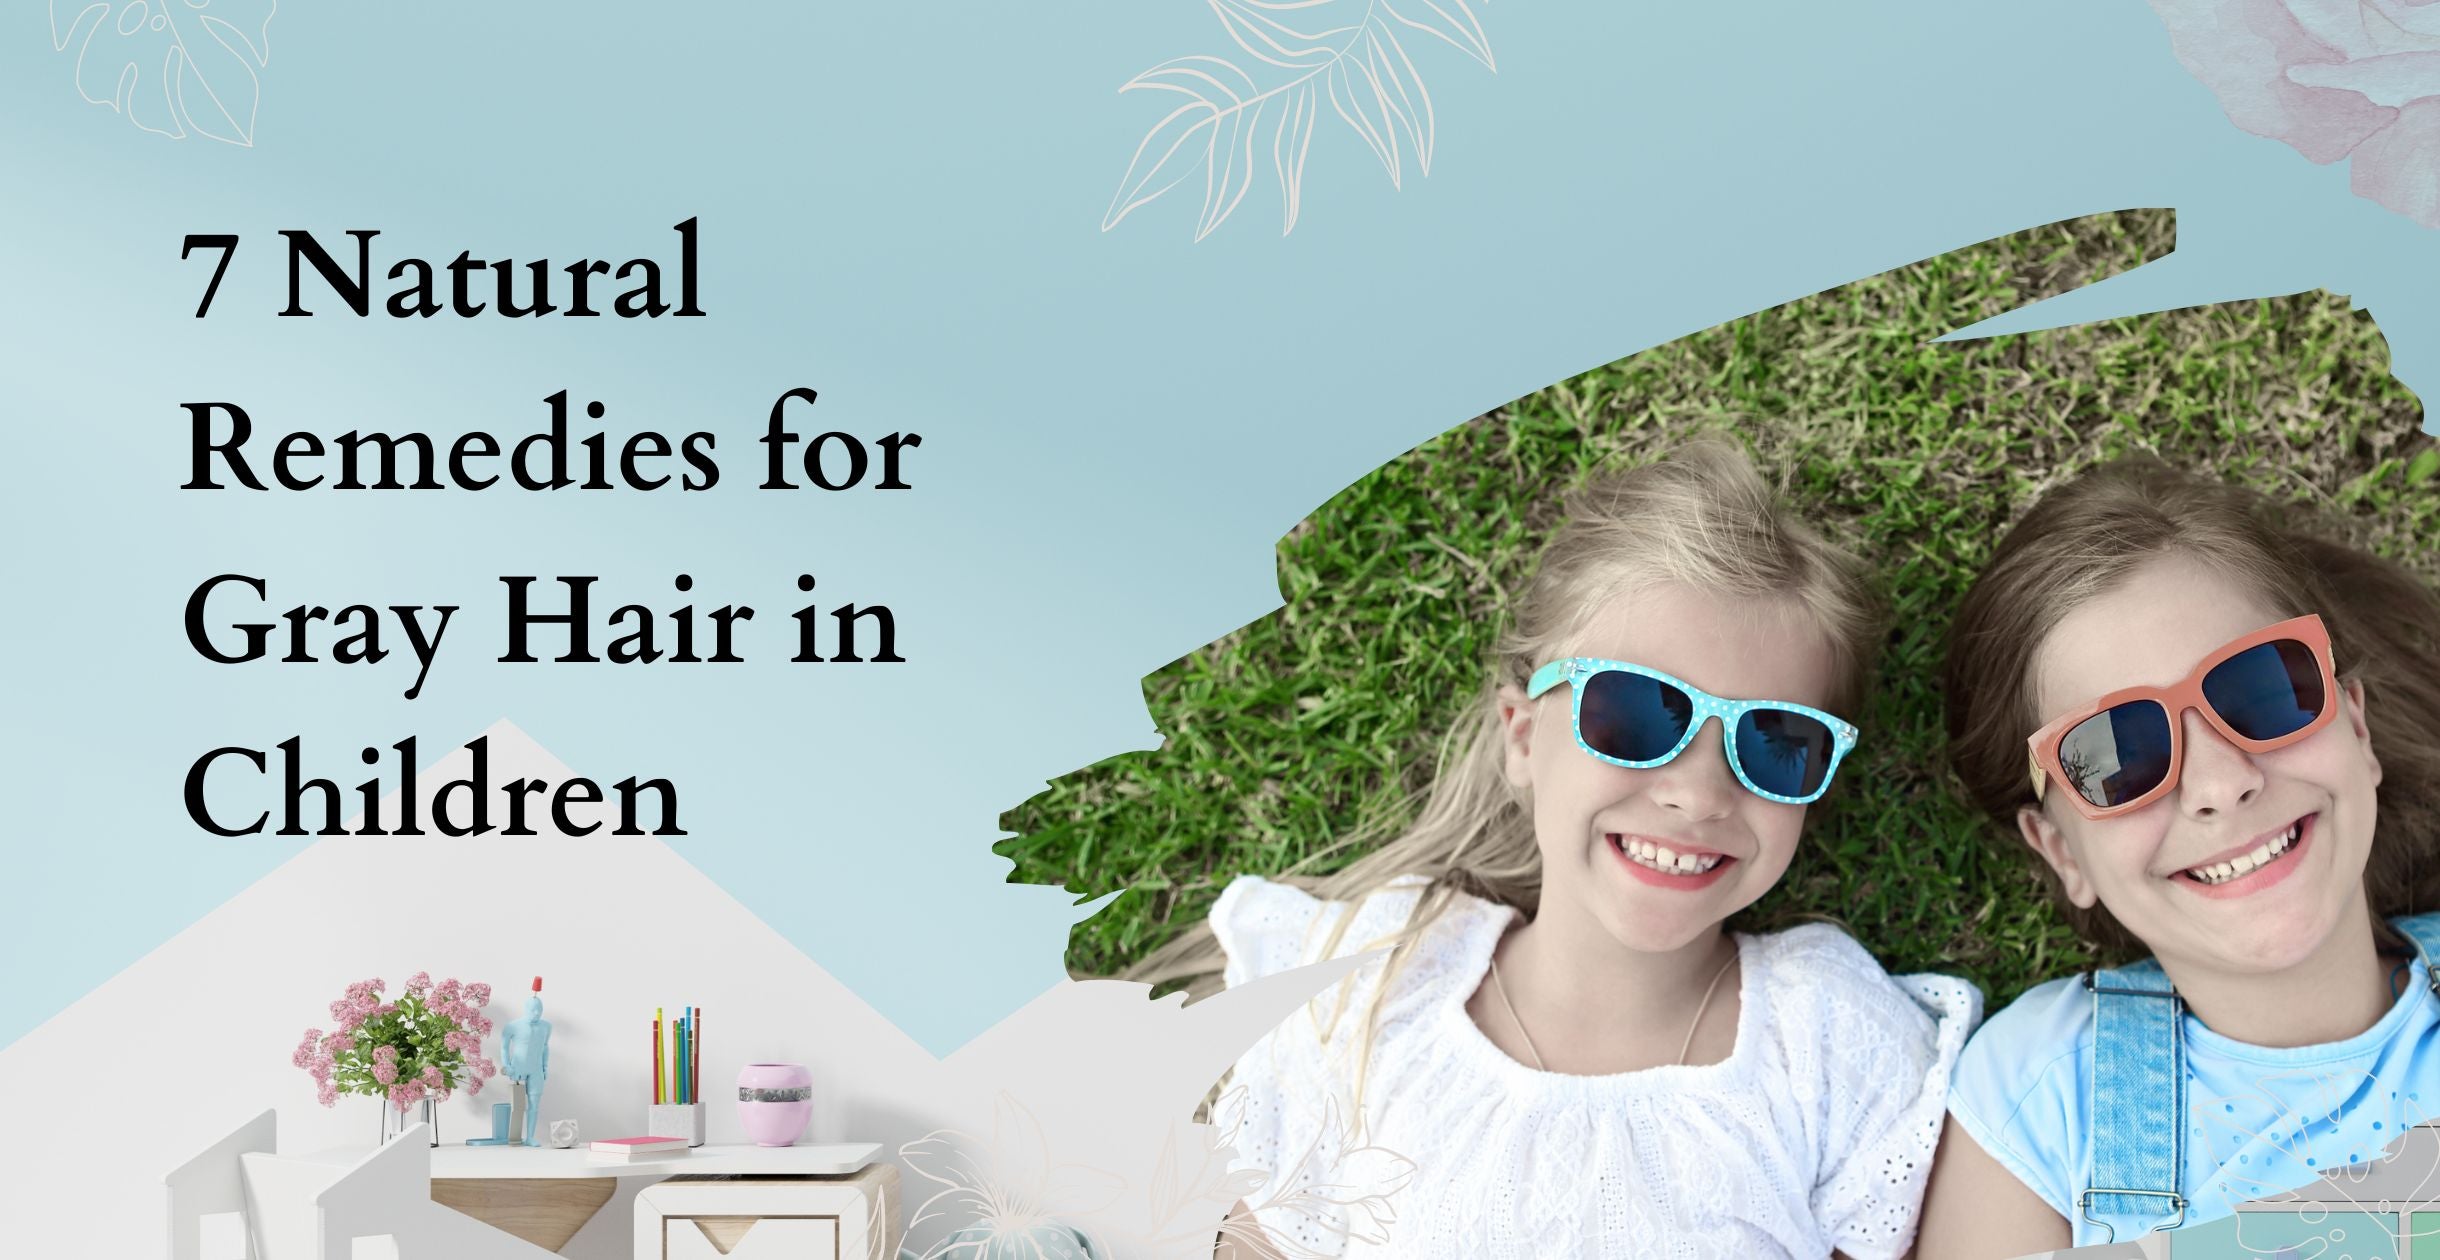 7 Natural Remedies for Gray Hair in Children